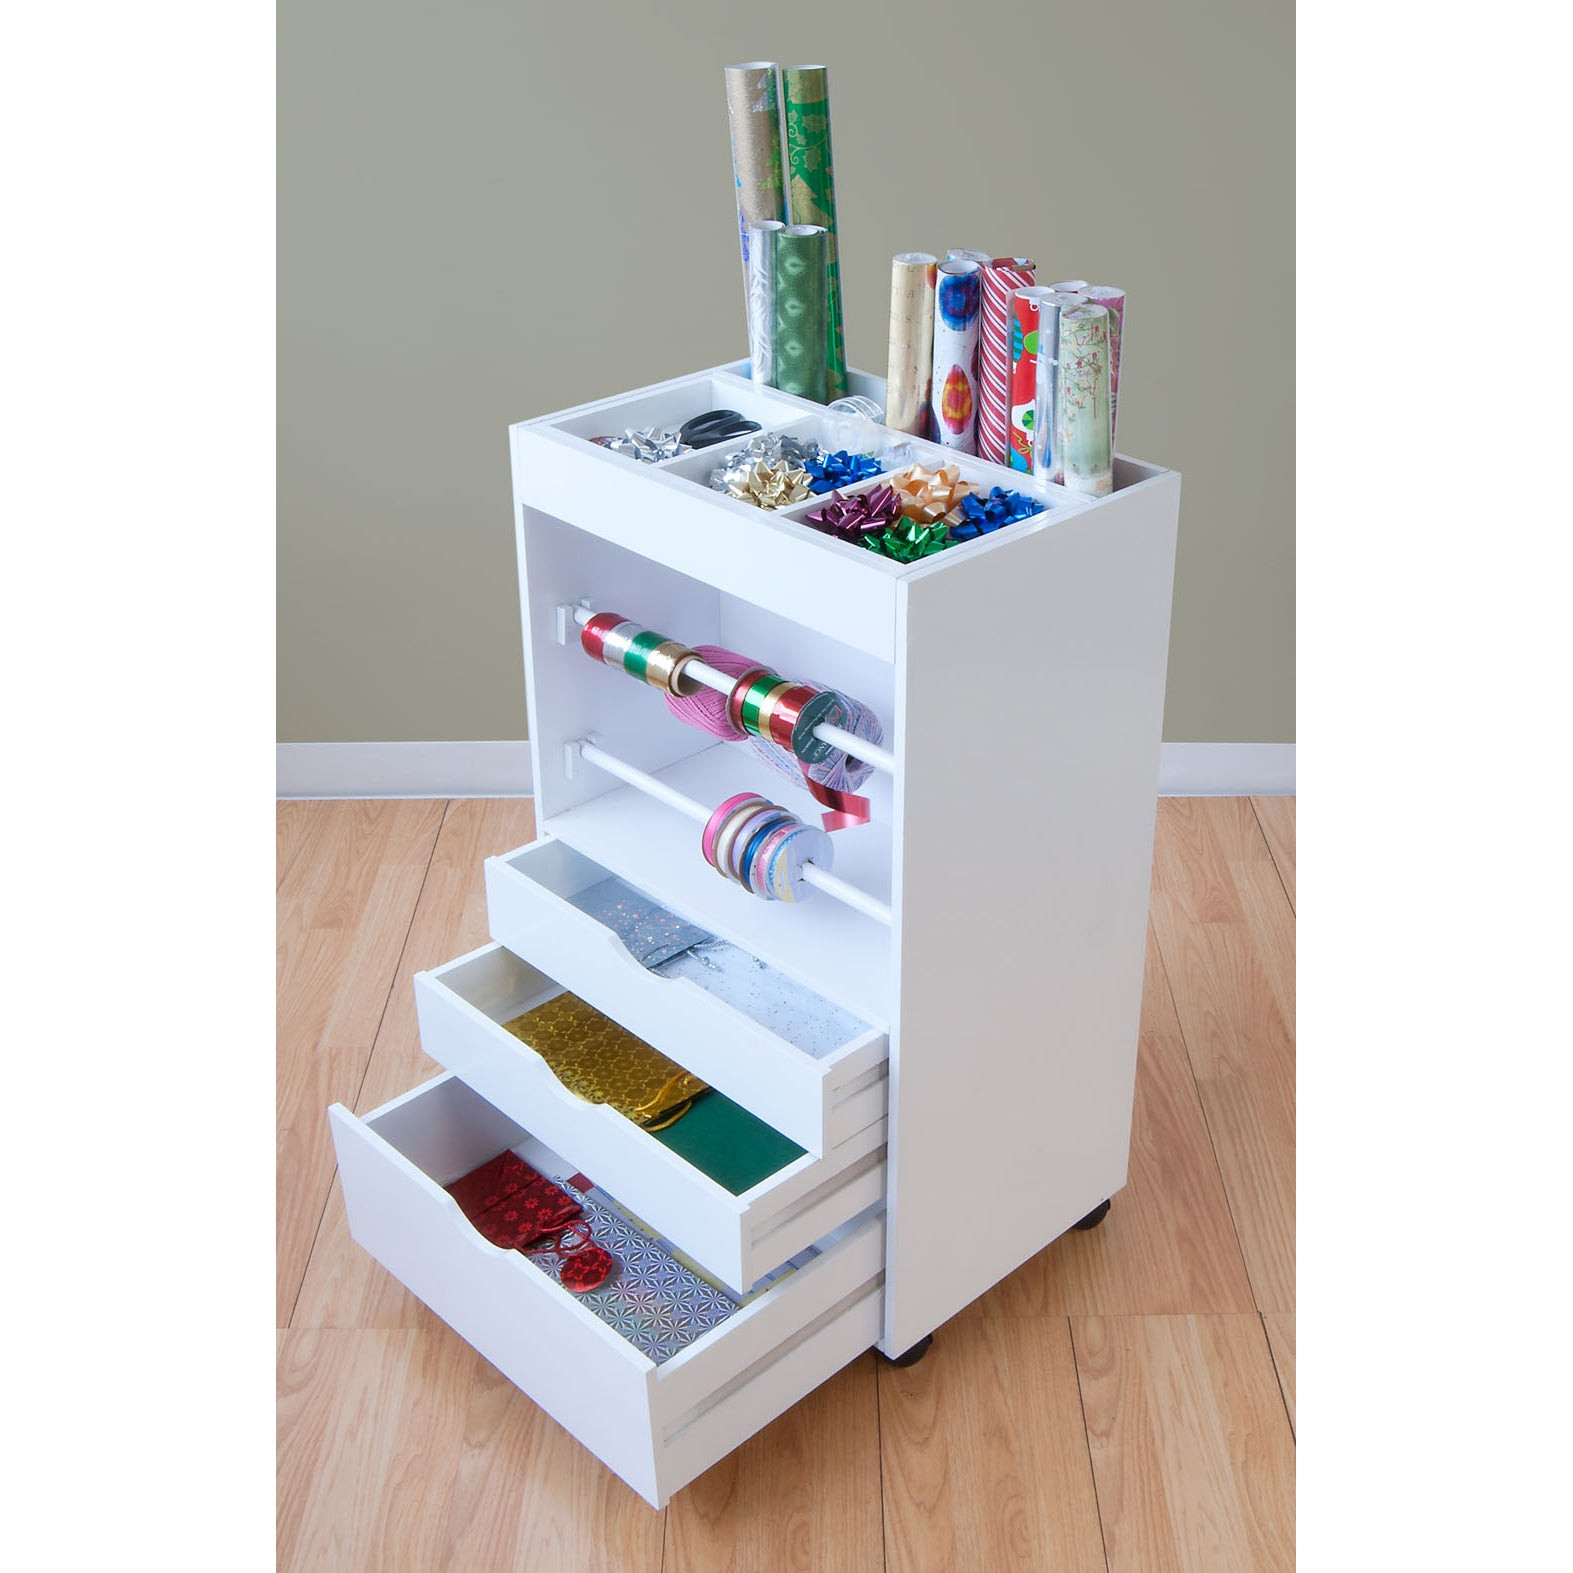 Wrapping Paper Organizer
 New White Wrapping Storage Container Cart 3 Drawer Gift